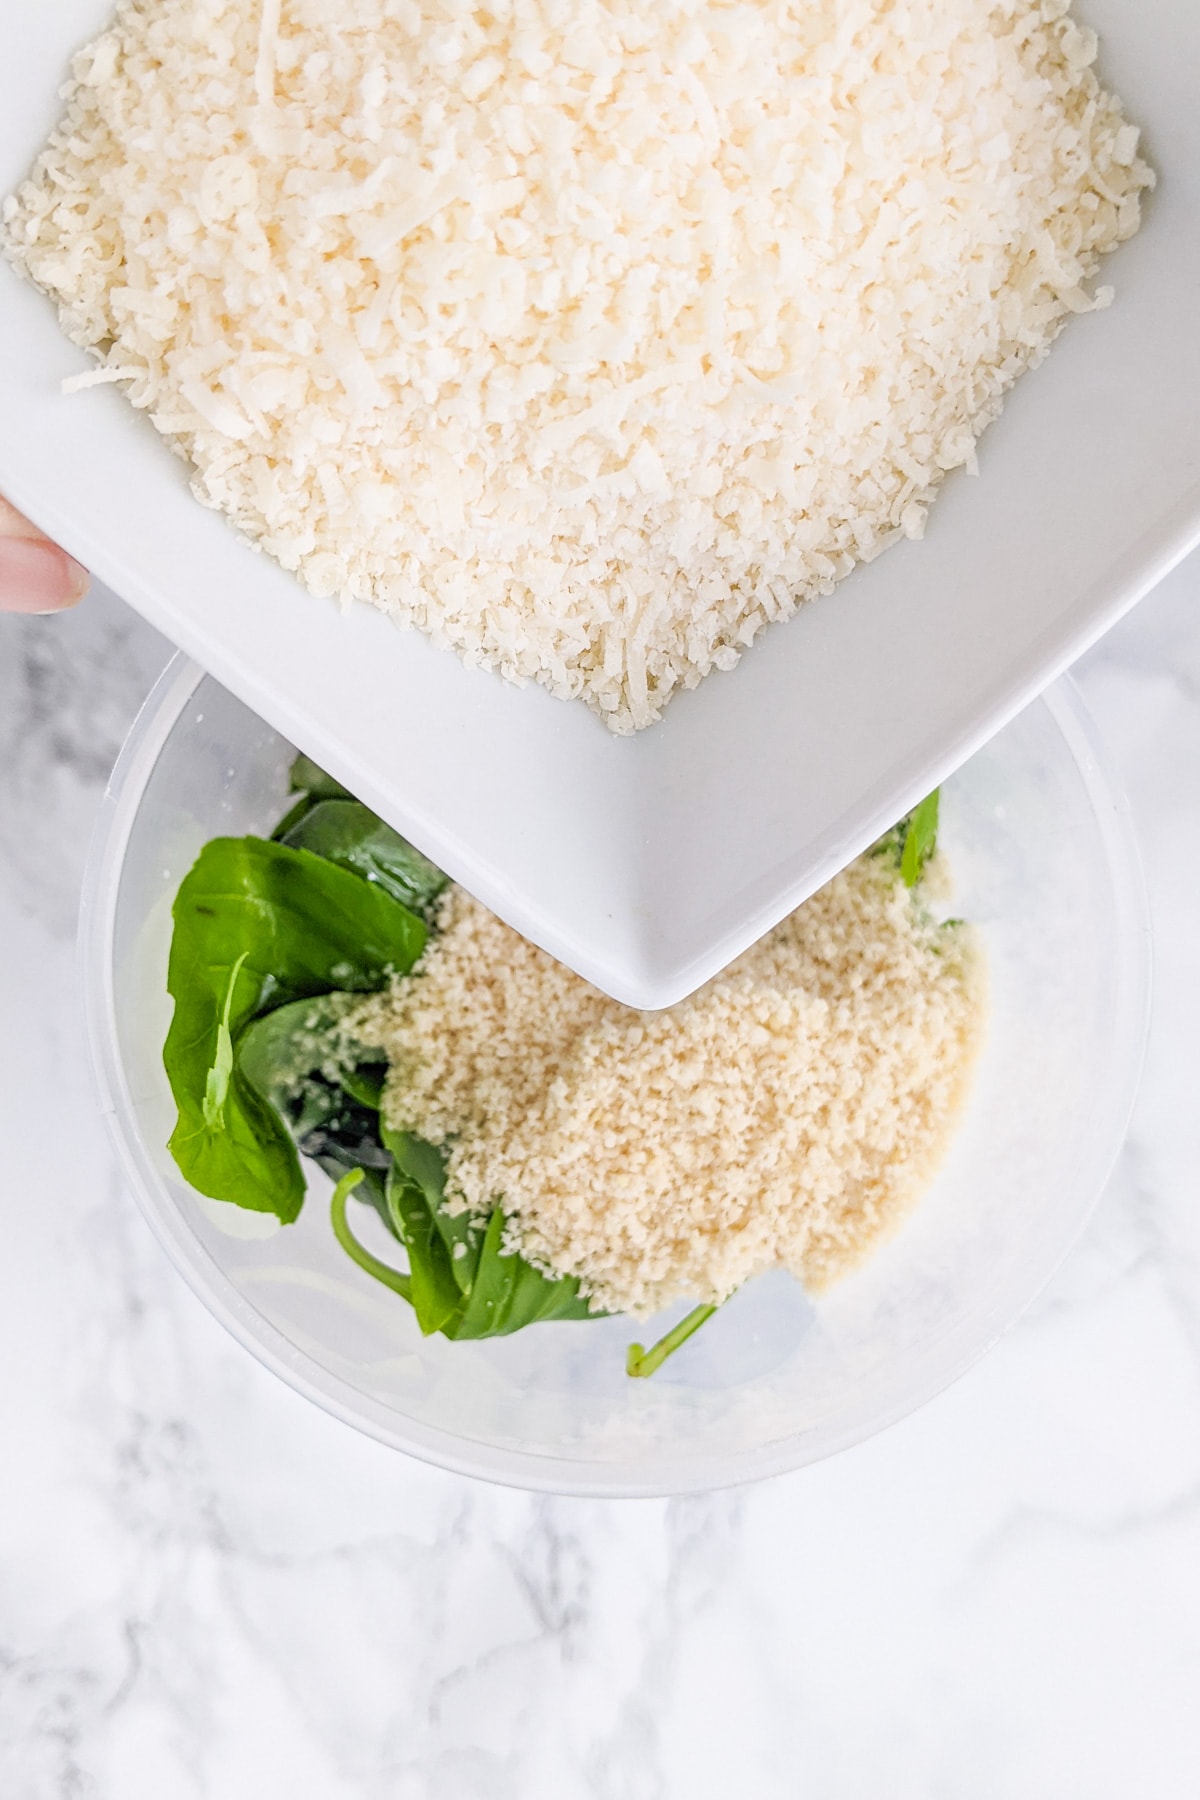 Close look of a plate with shredded parmesan over a bowl with basil and almond flour.